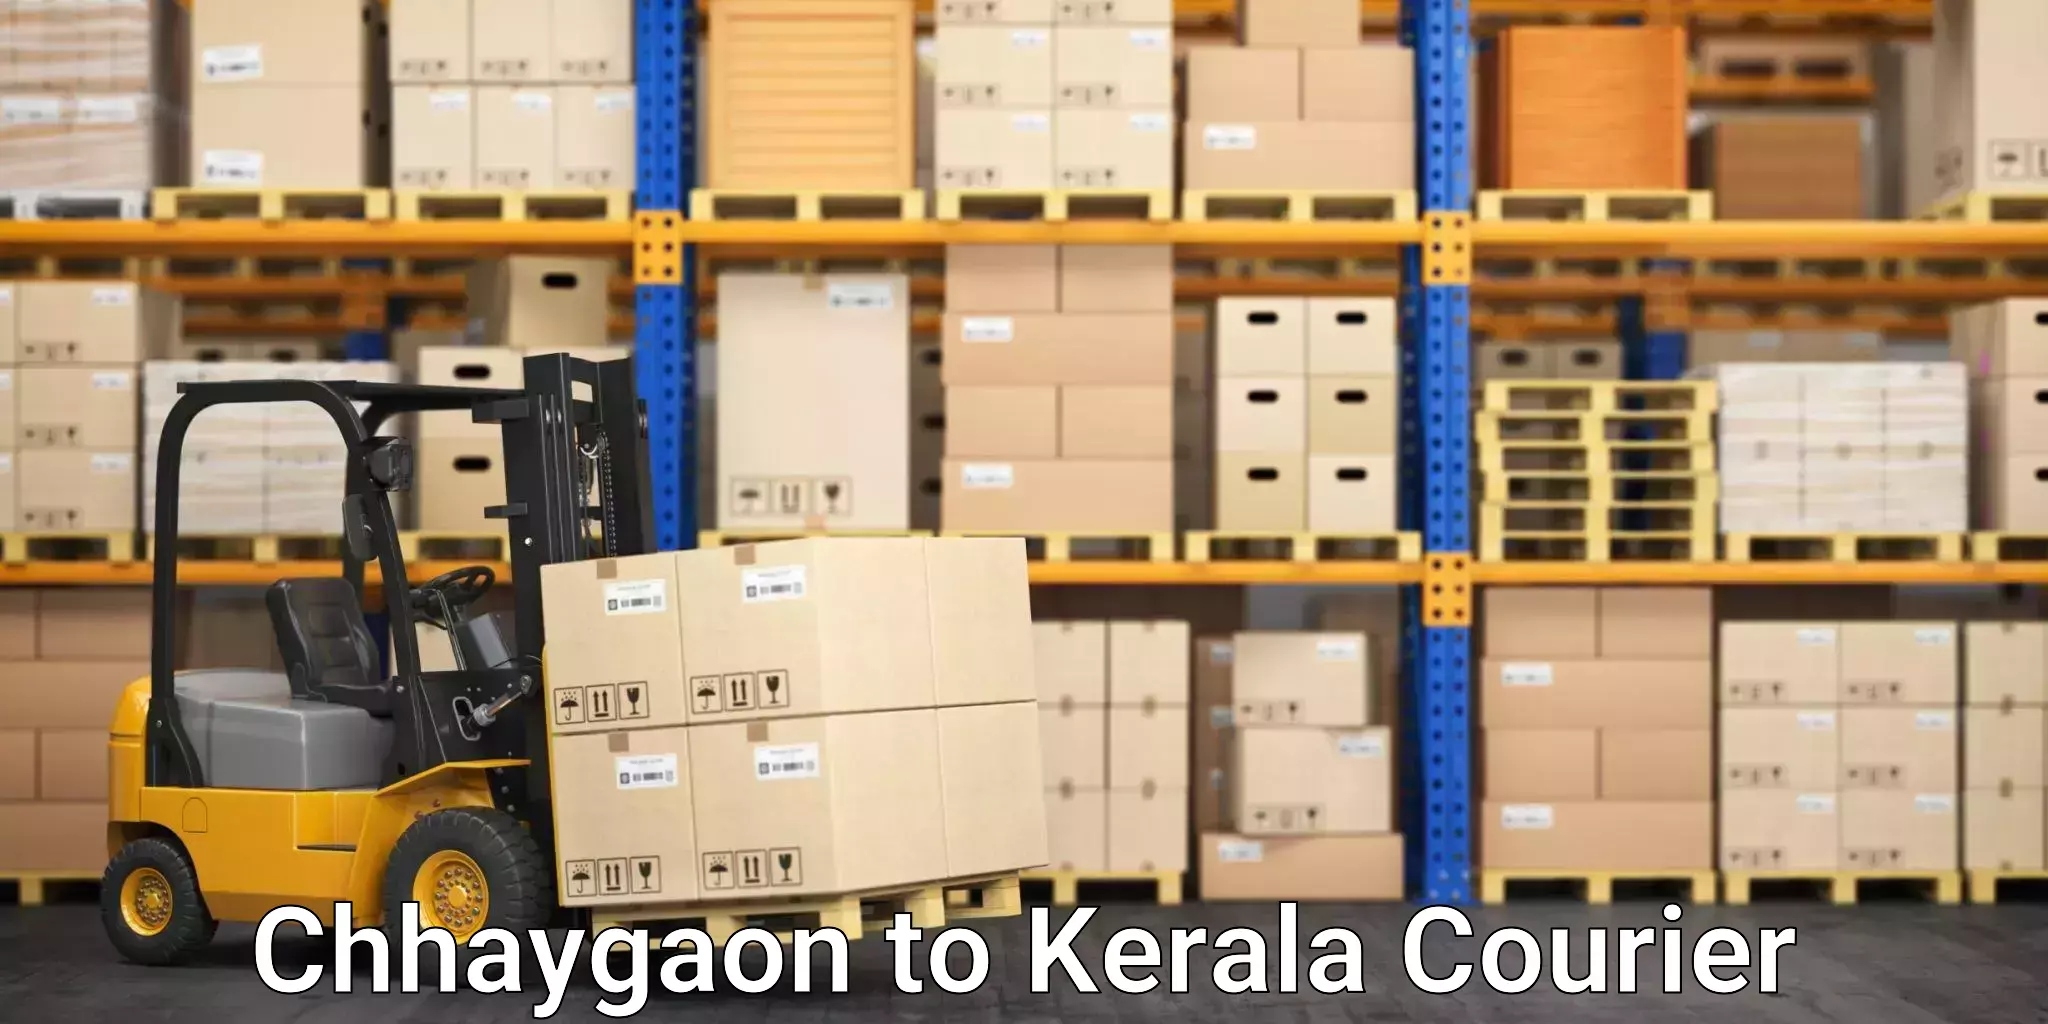 Courier service booking Chhaygaon to Kerala